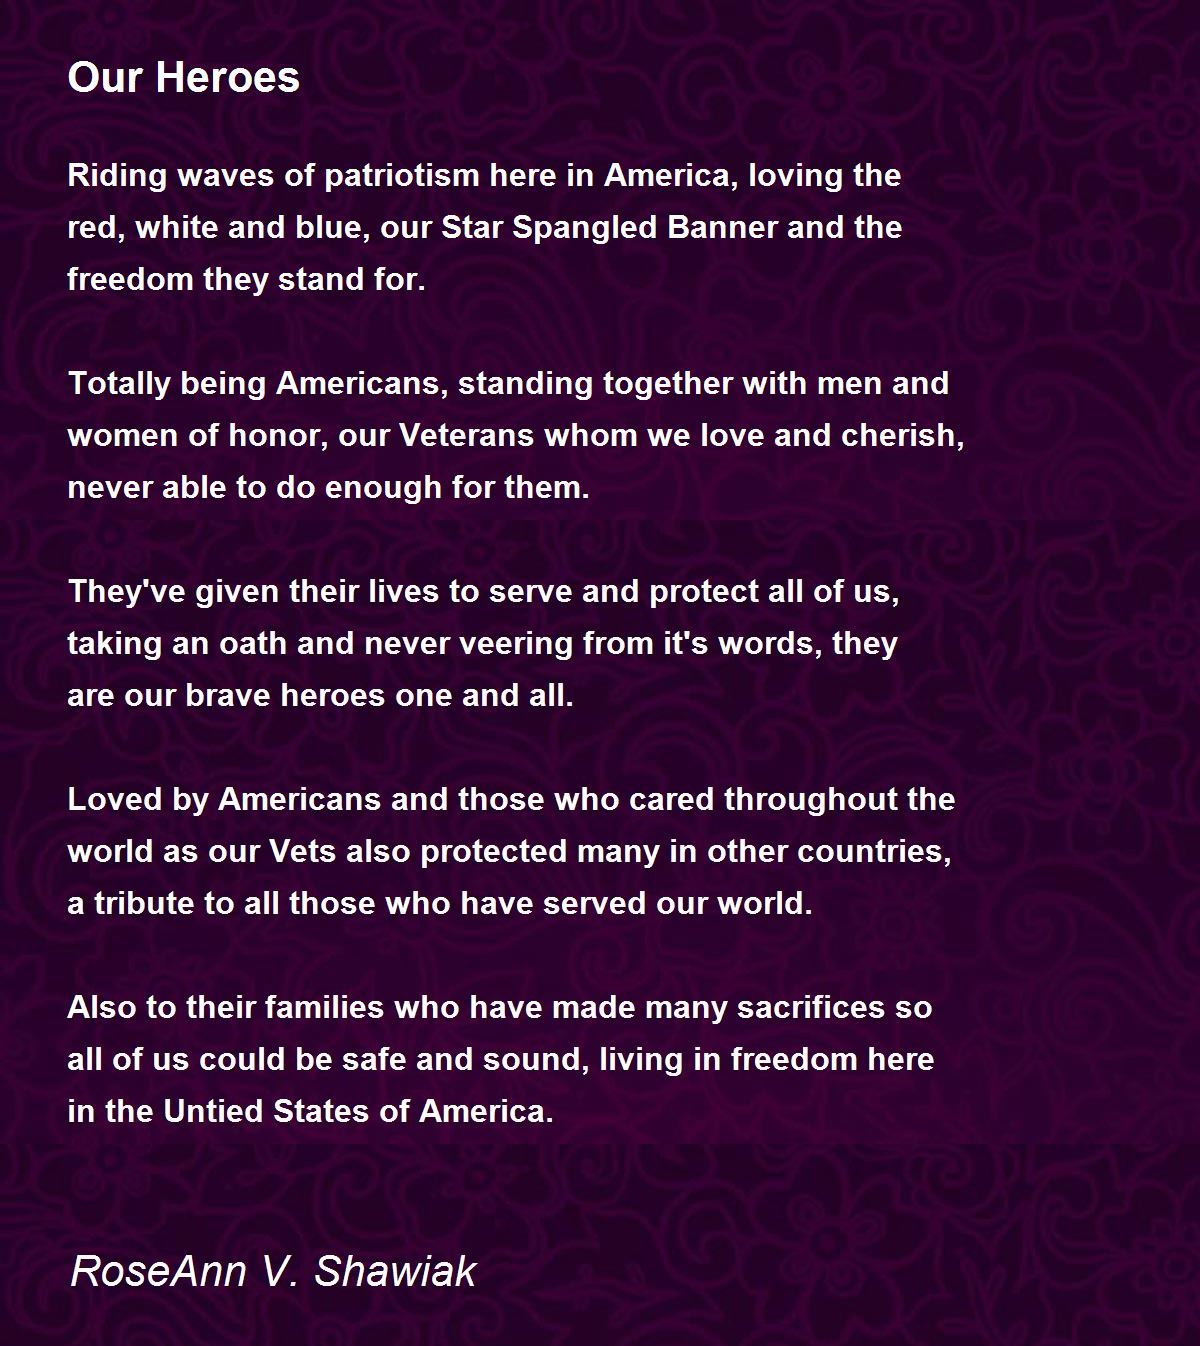 Our Heroes - Our Heroes Poem by RoseAnn V. Shawiak